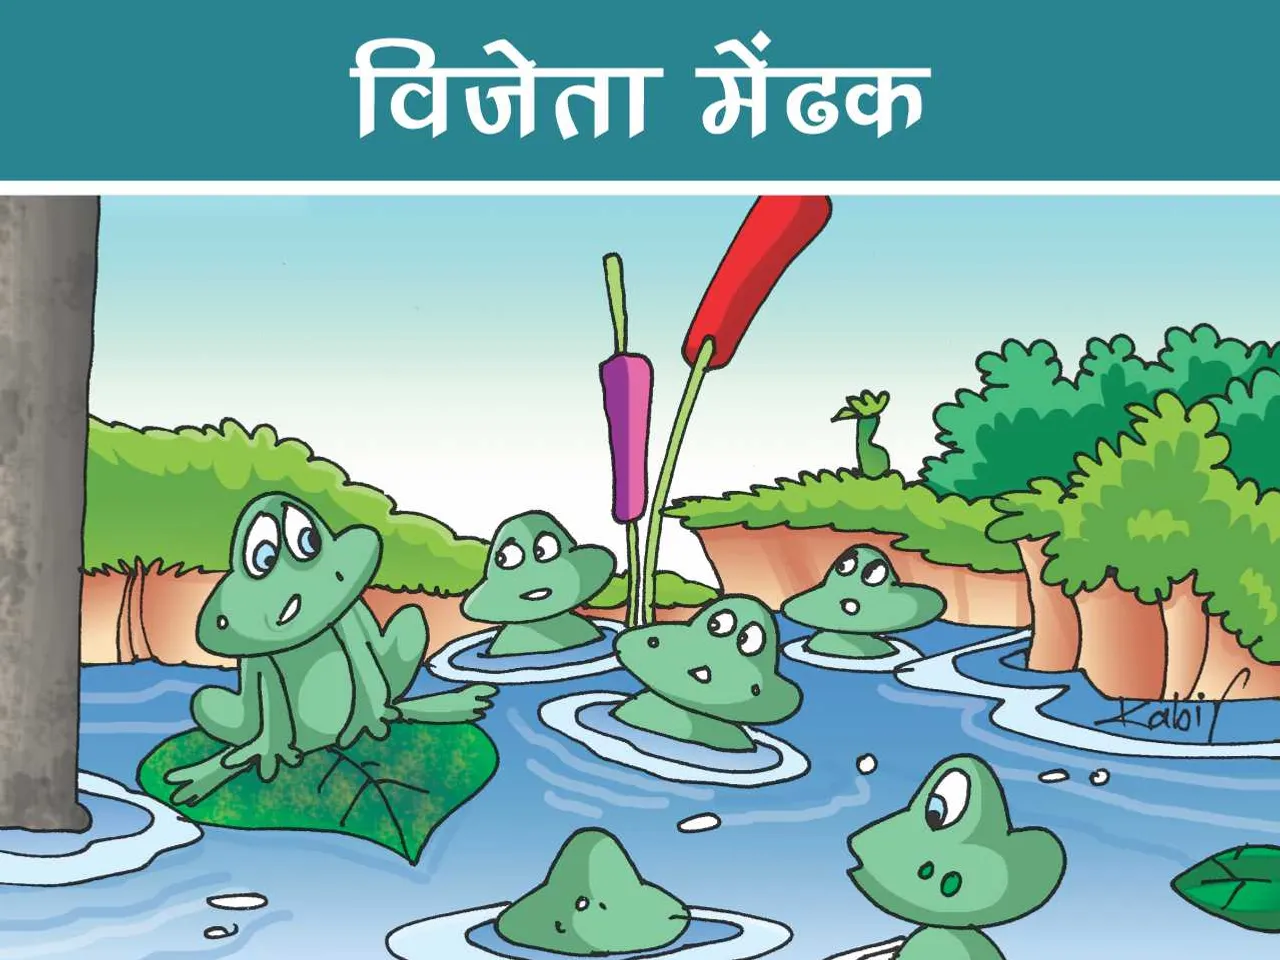 Frogs in a Pond cartoon image